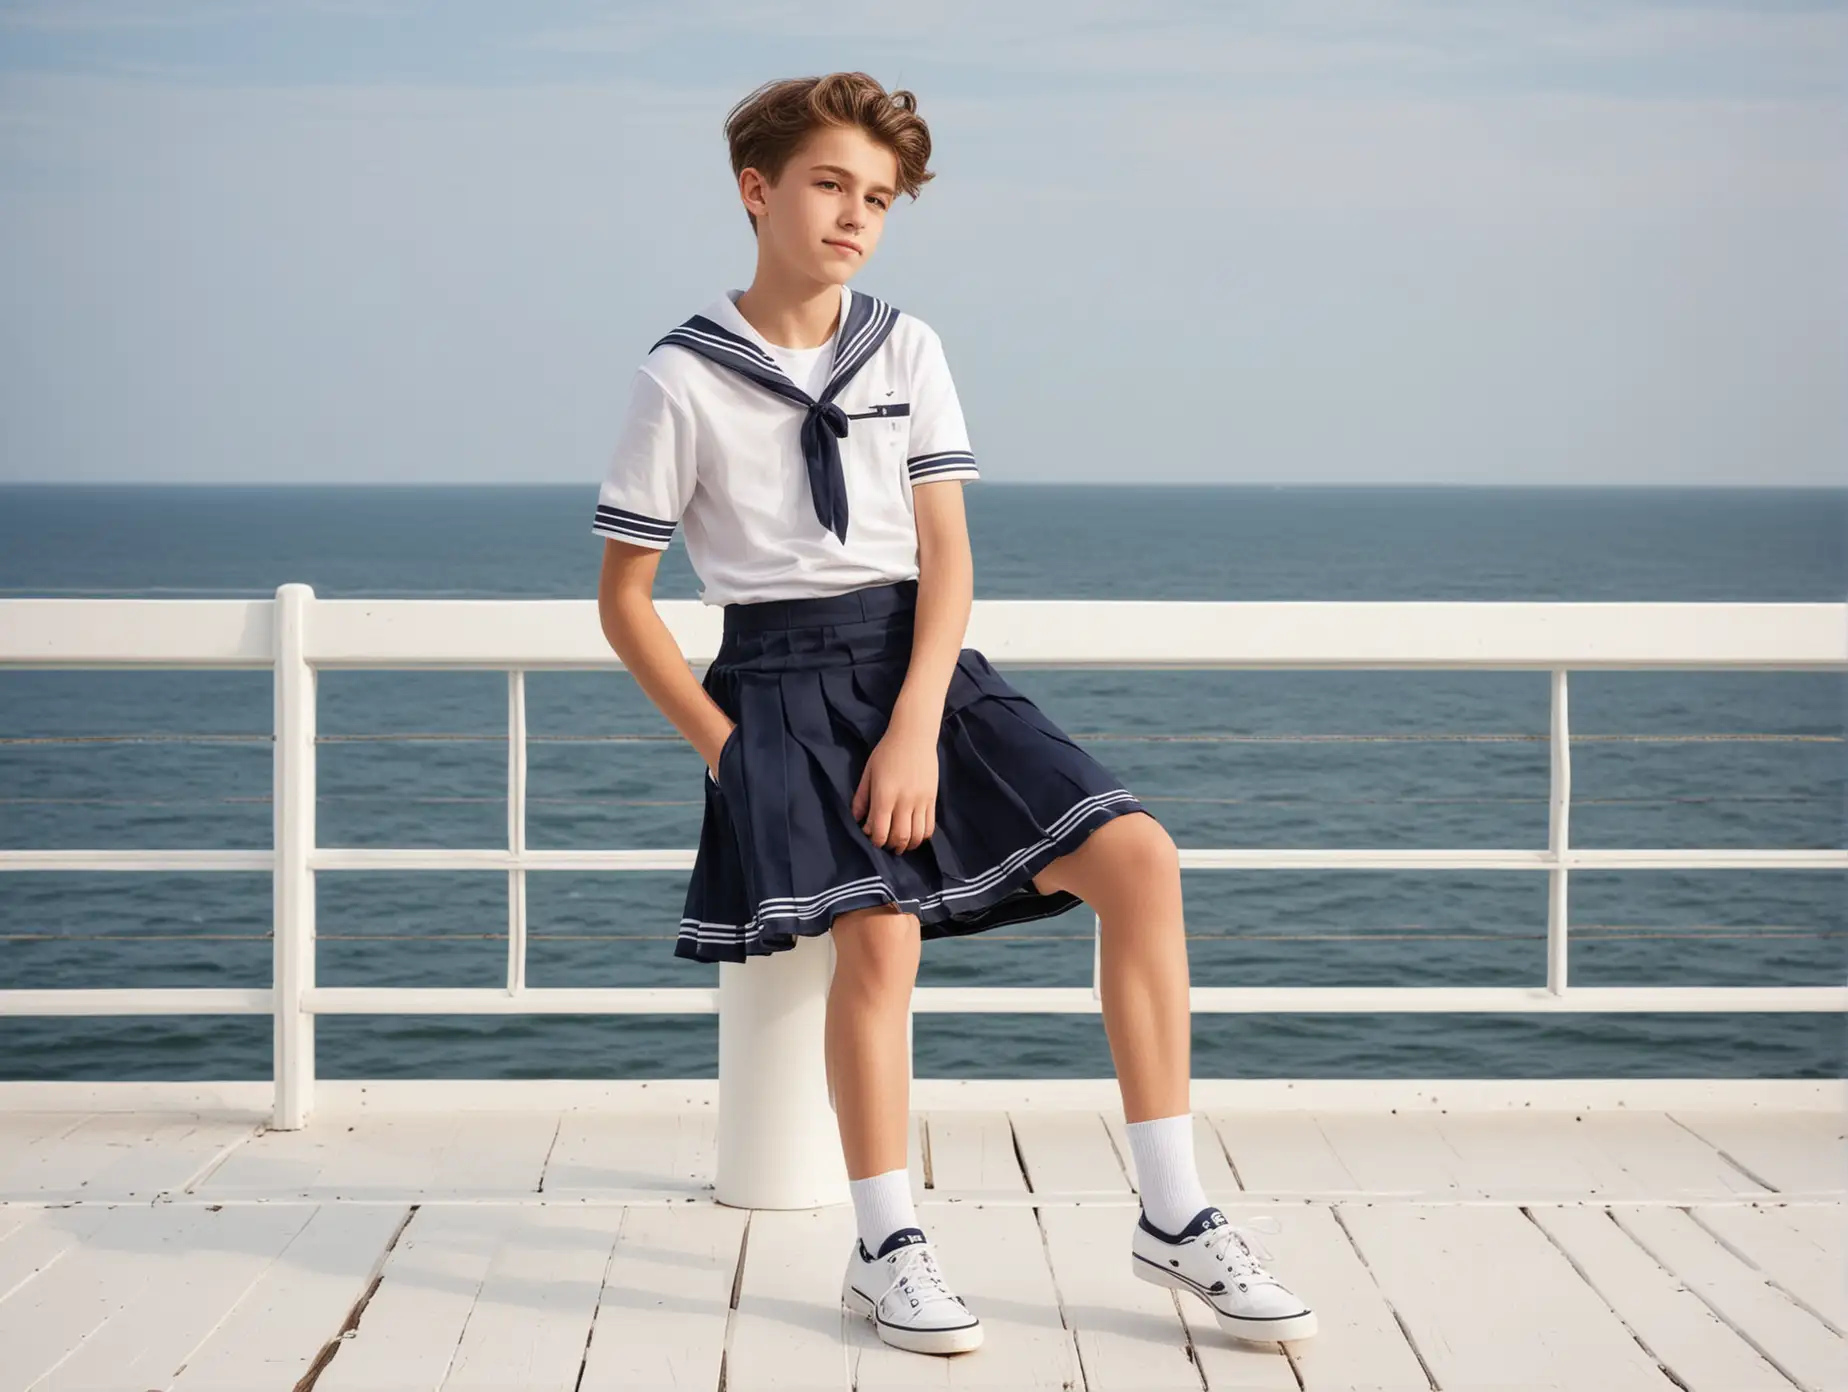 Youthful-Sailor-Boy-in-White-Deck-Shoes